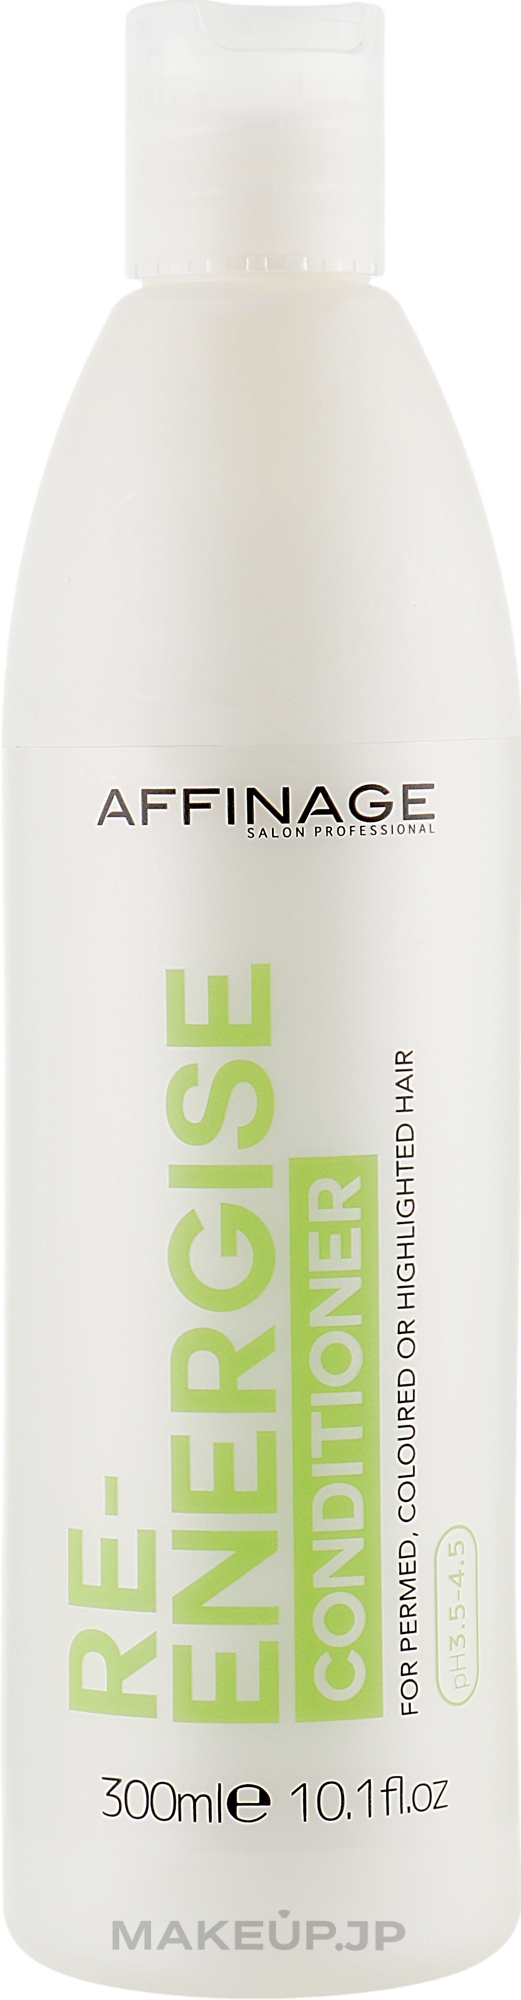 Damaged Hair Conditioner - Affinage Salon Professional Re-Energise Conditioner — photo 300 ml